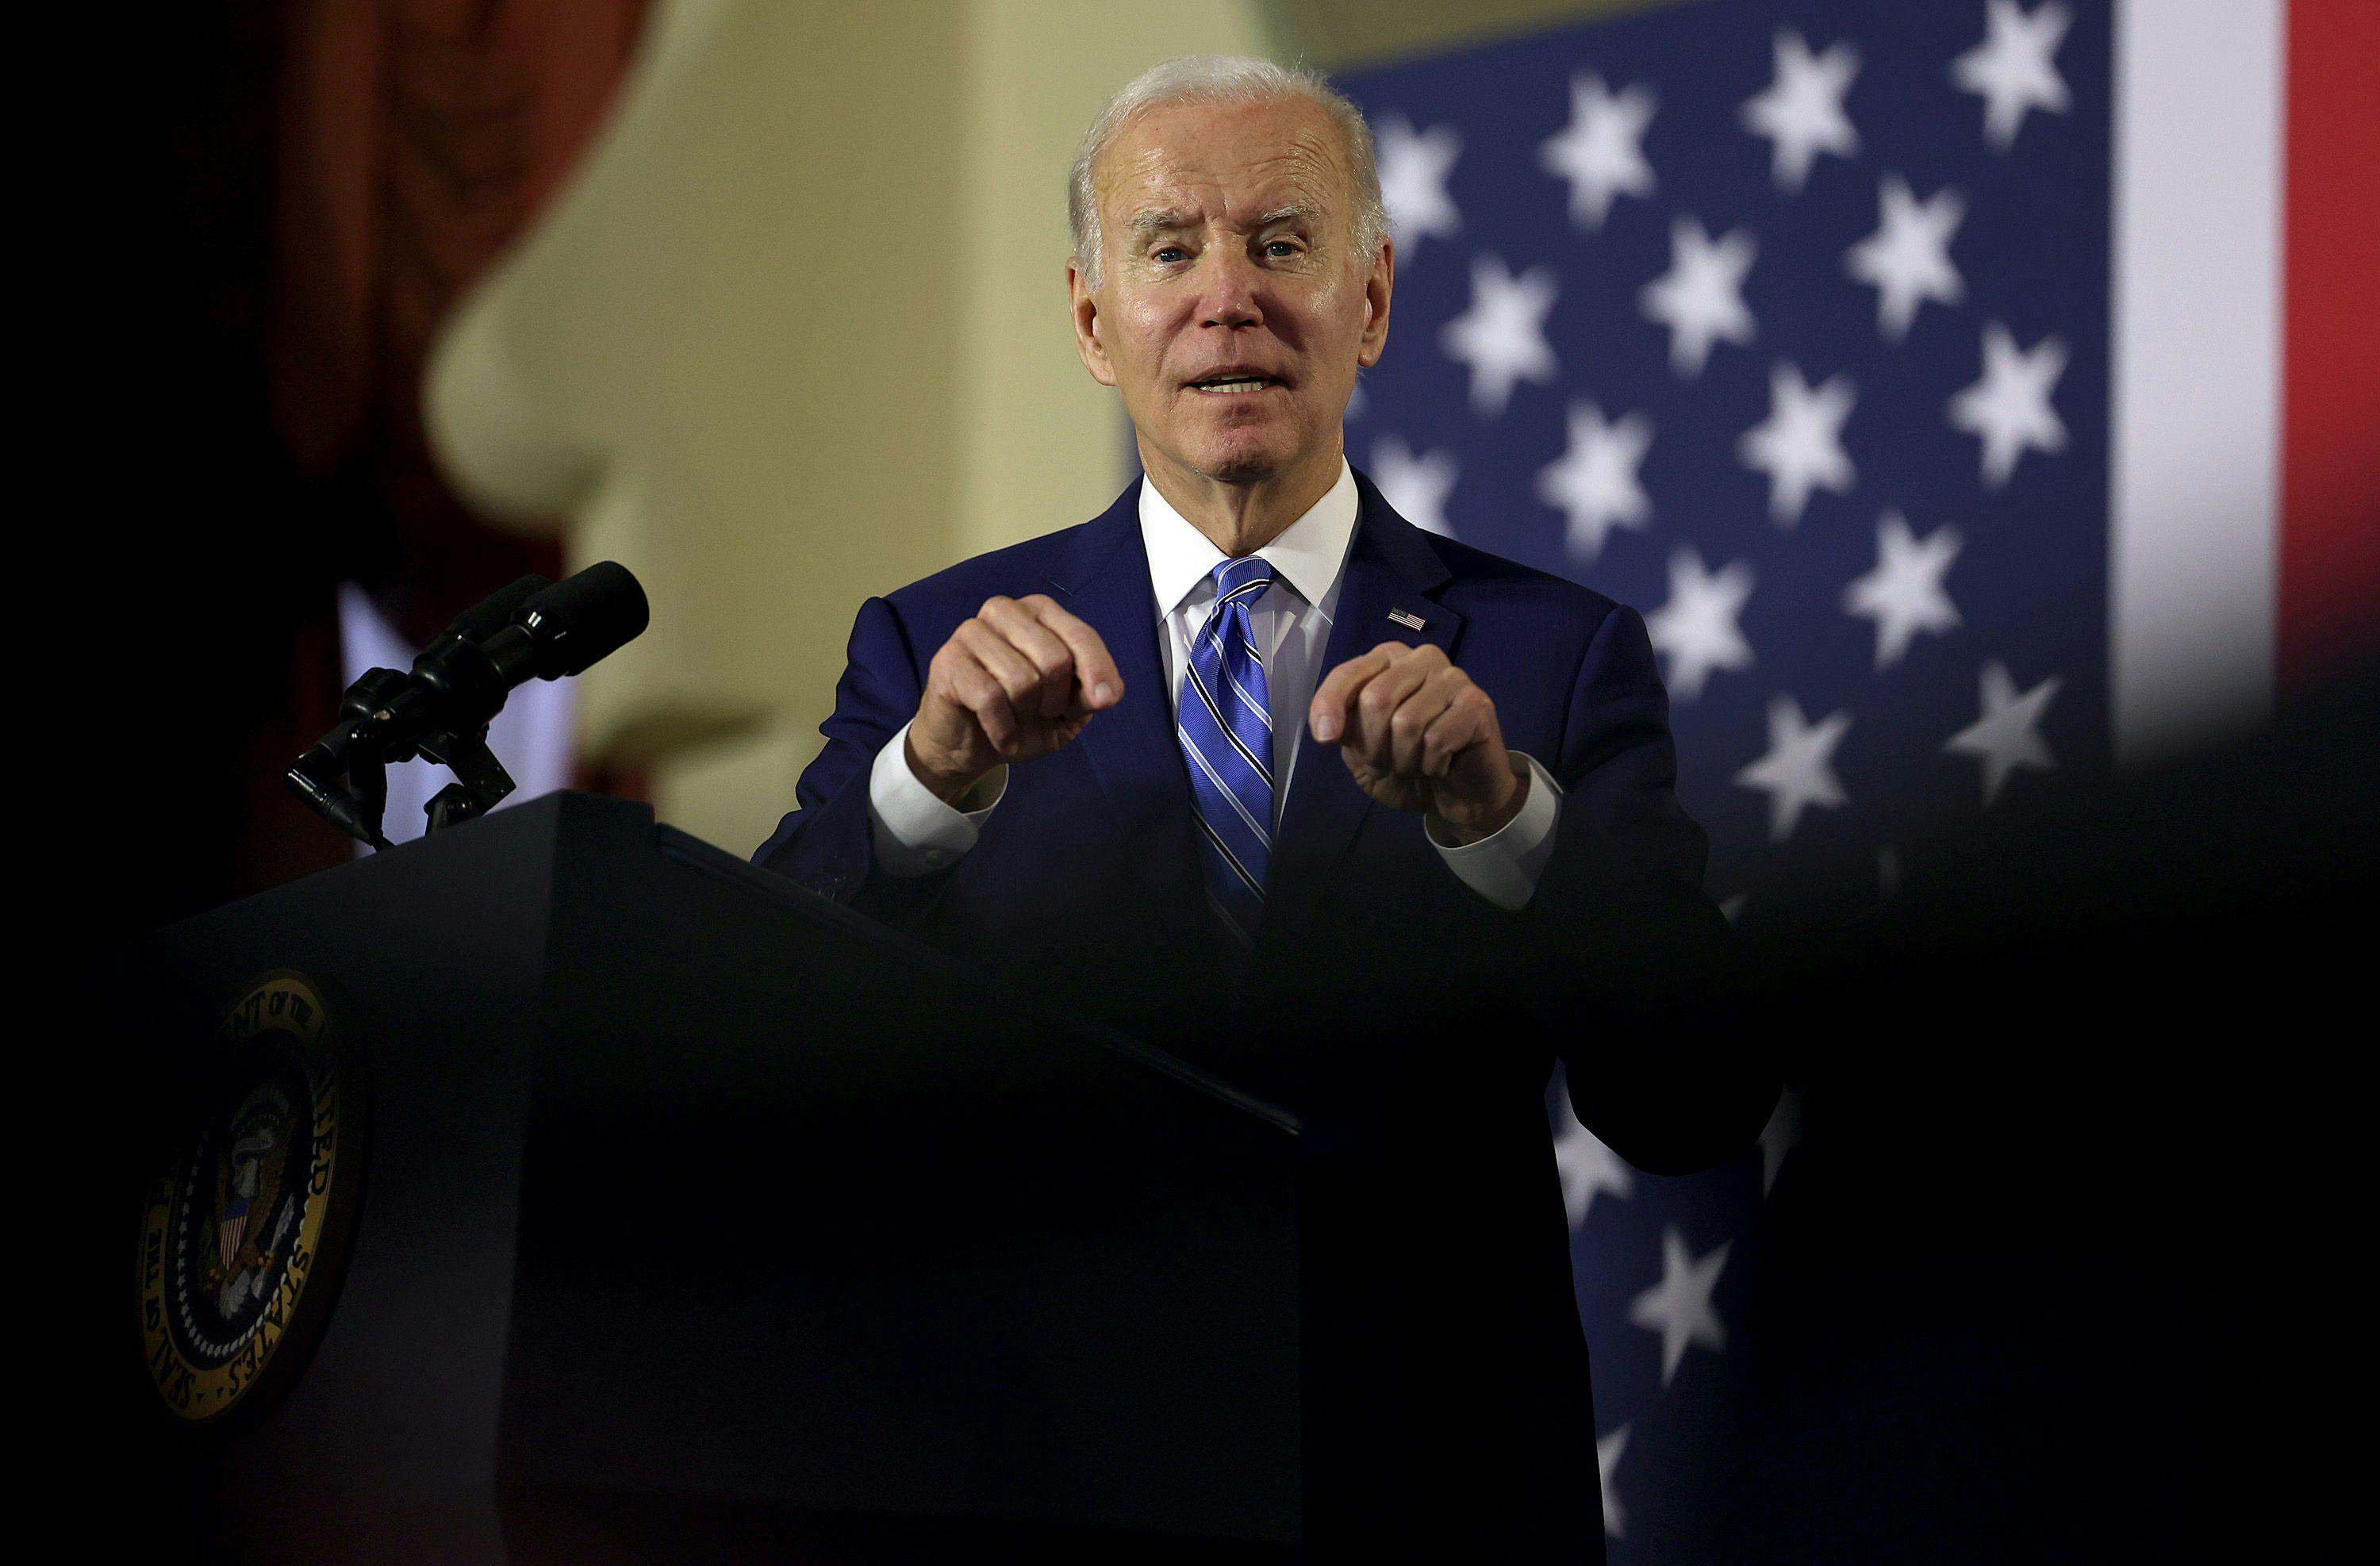 President Biden Discusses Strengthening Social Security And Medicare And Lower Healthcare Costs At The University Of Tampa